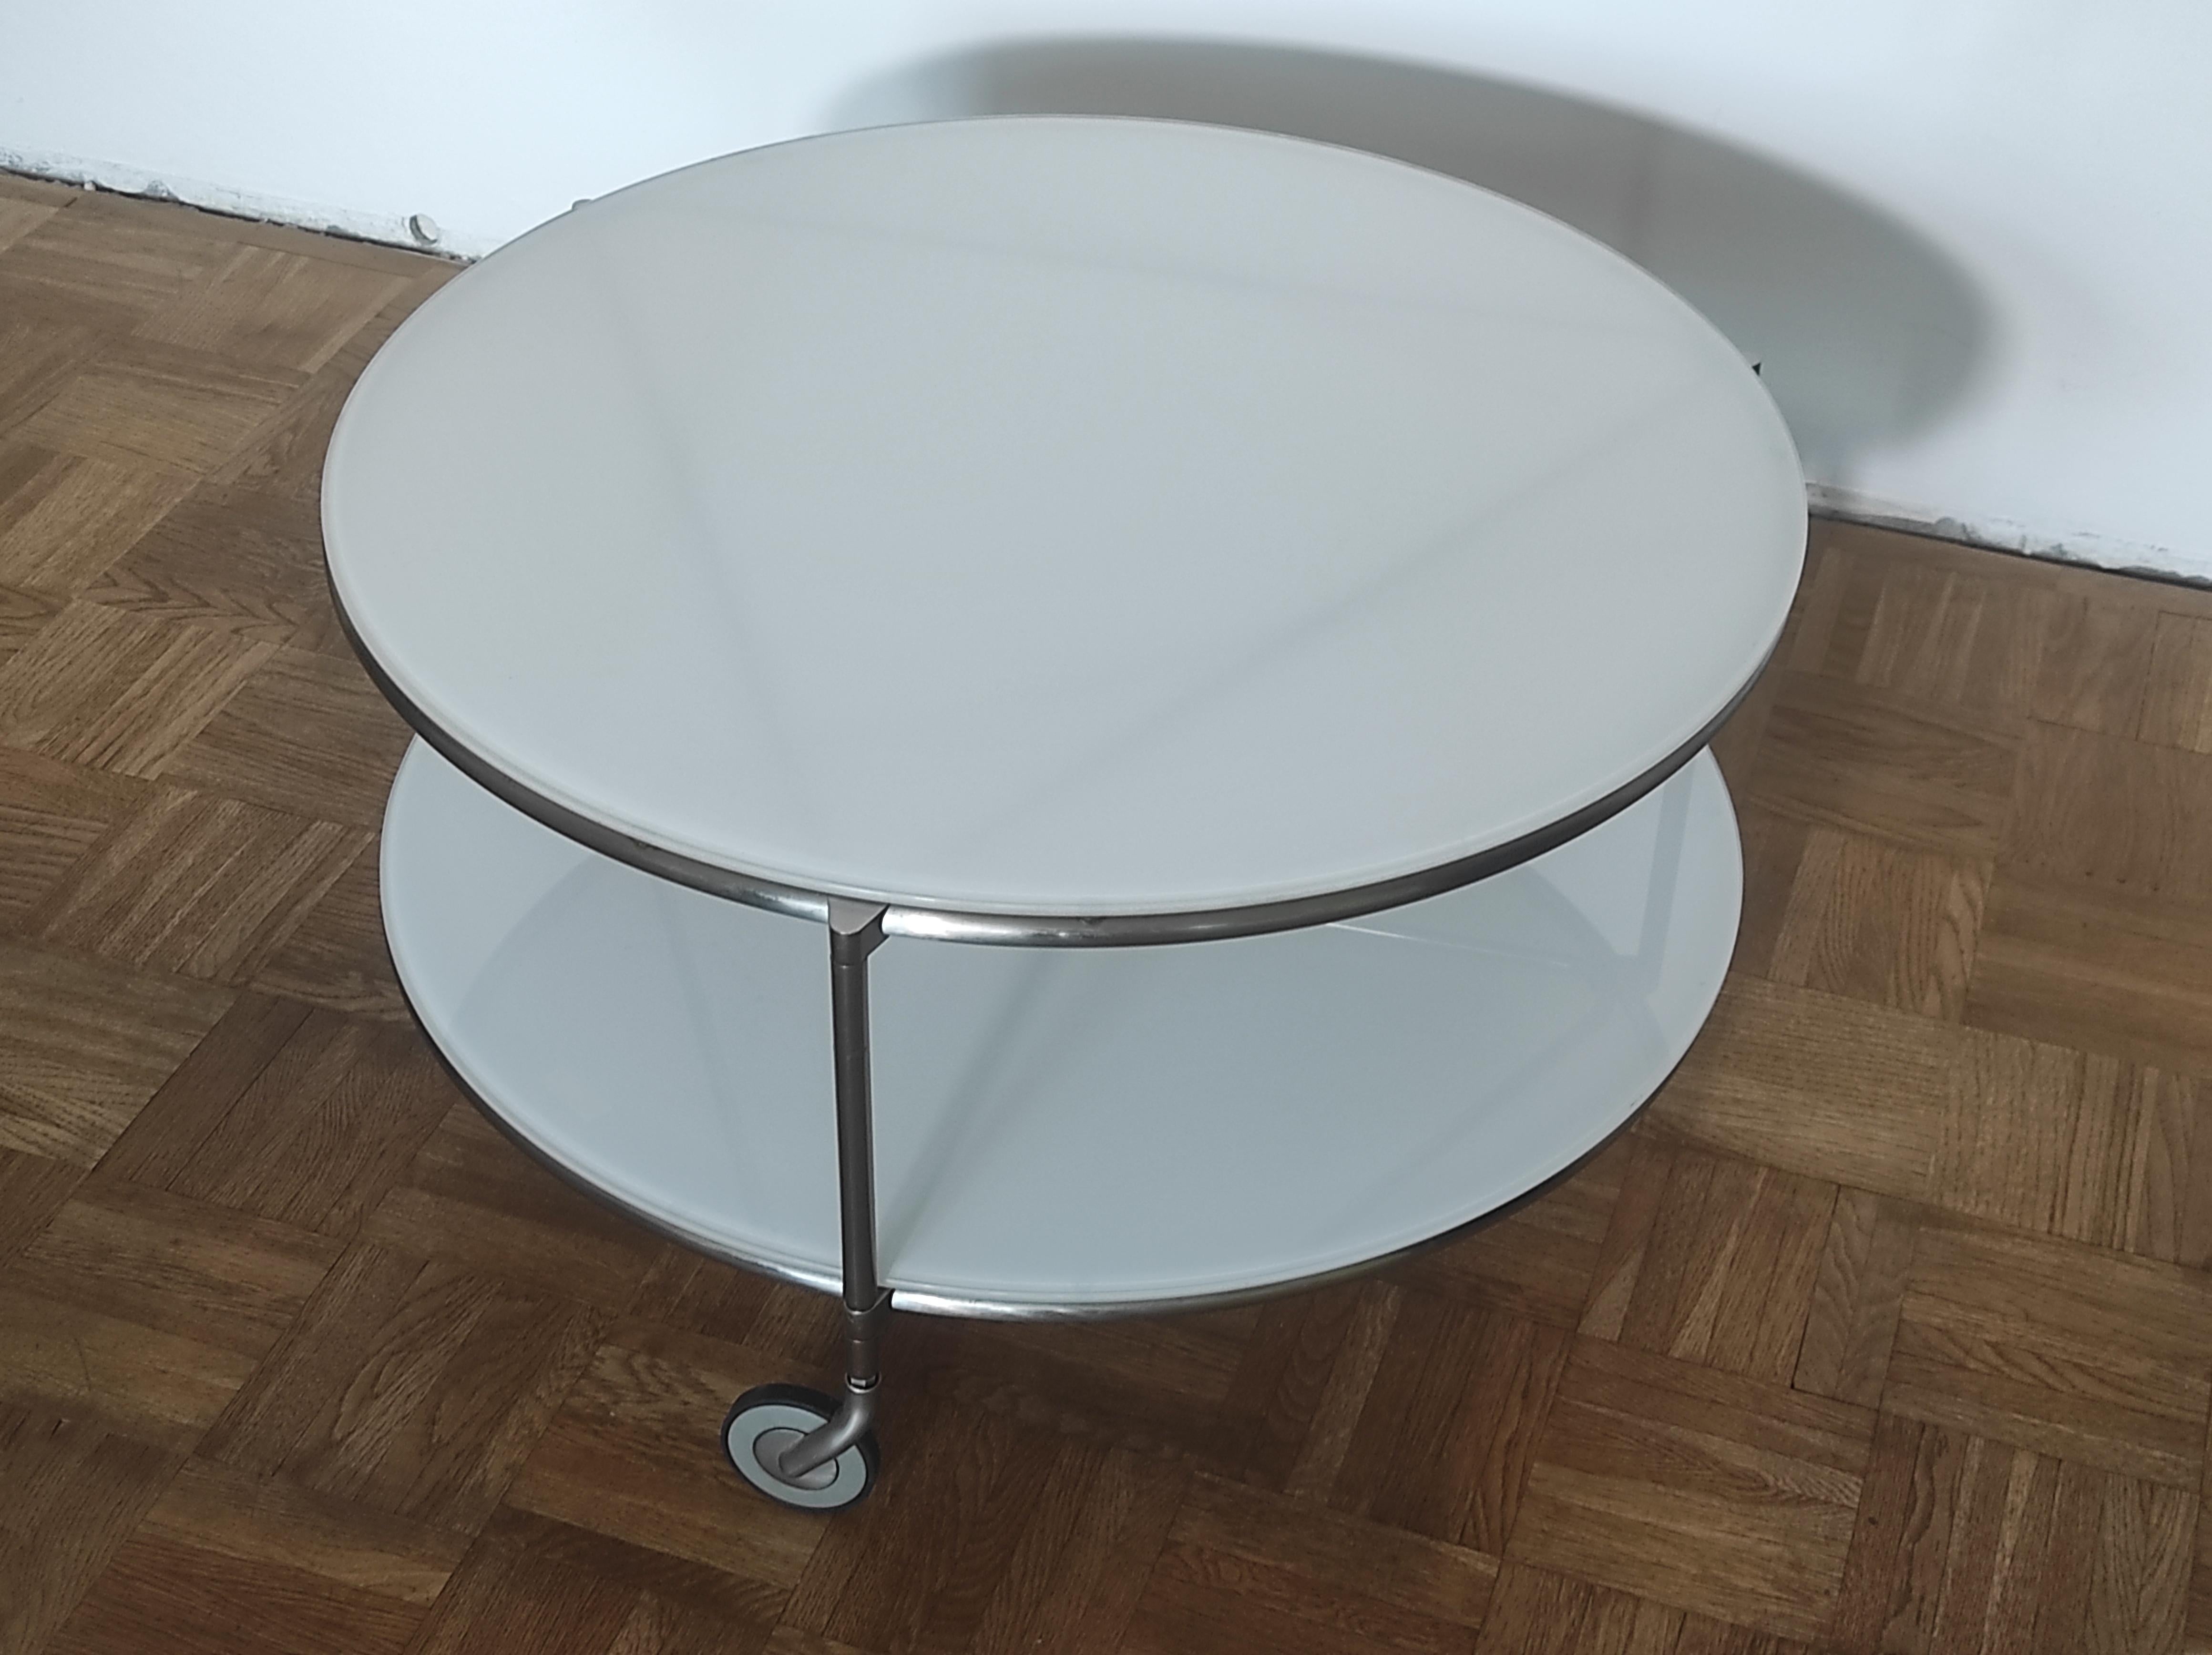 Ikea Strind Coffe Table 1980s In Excellent Condition For Sale In Čelinac, BA